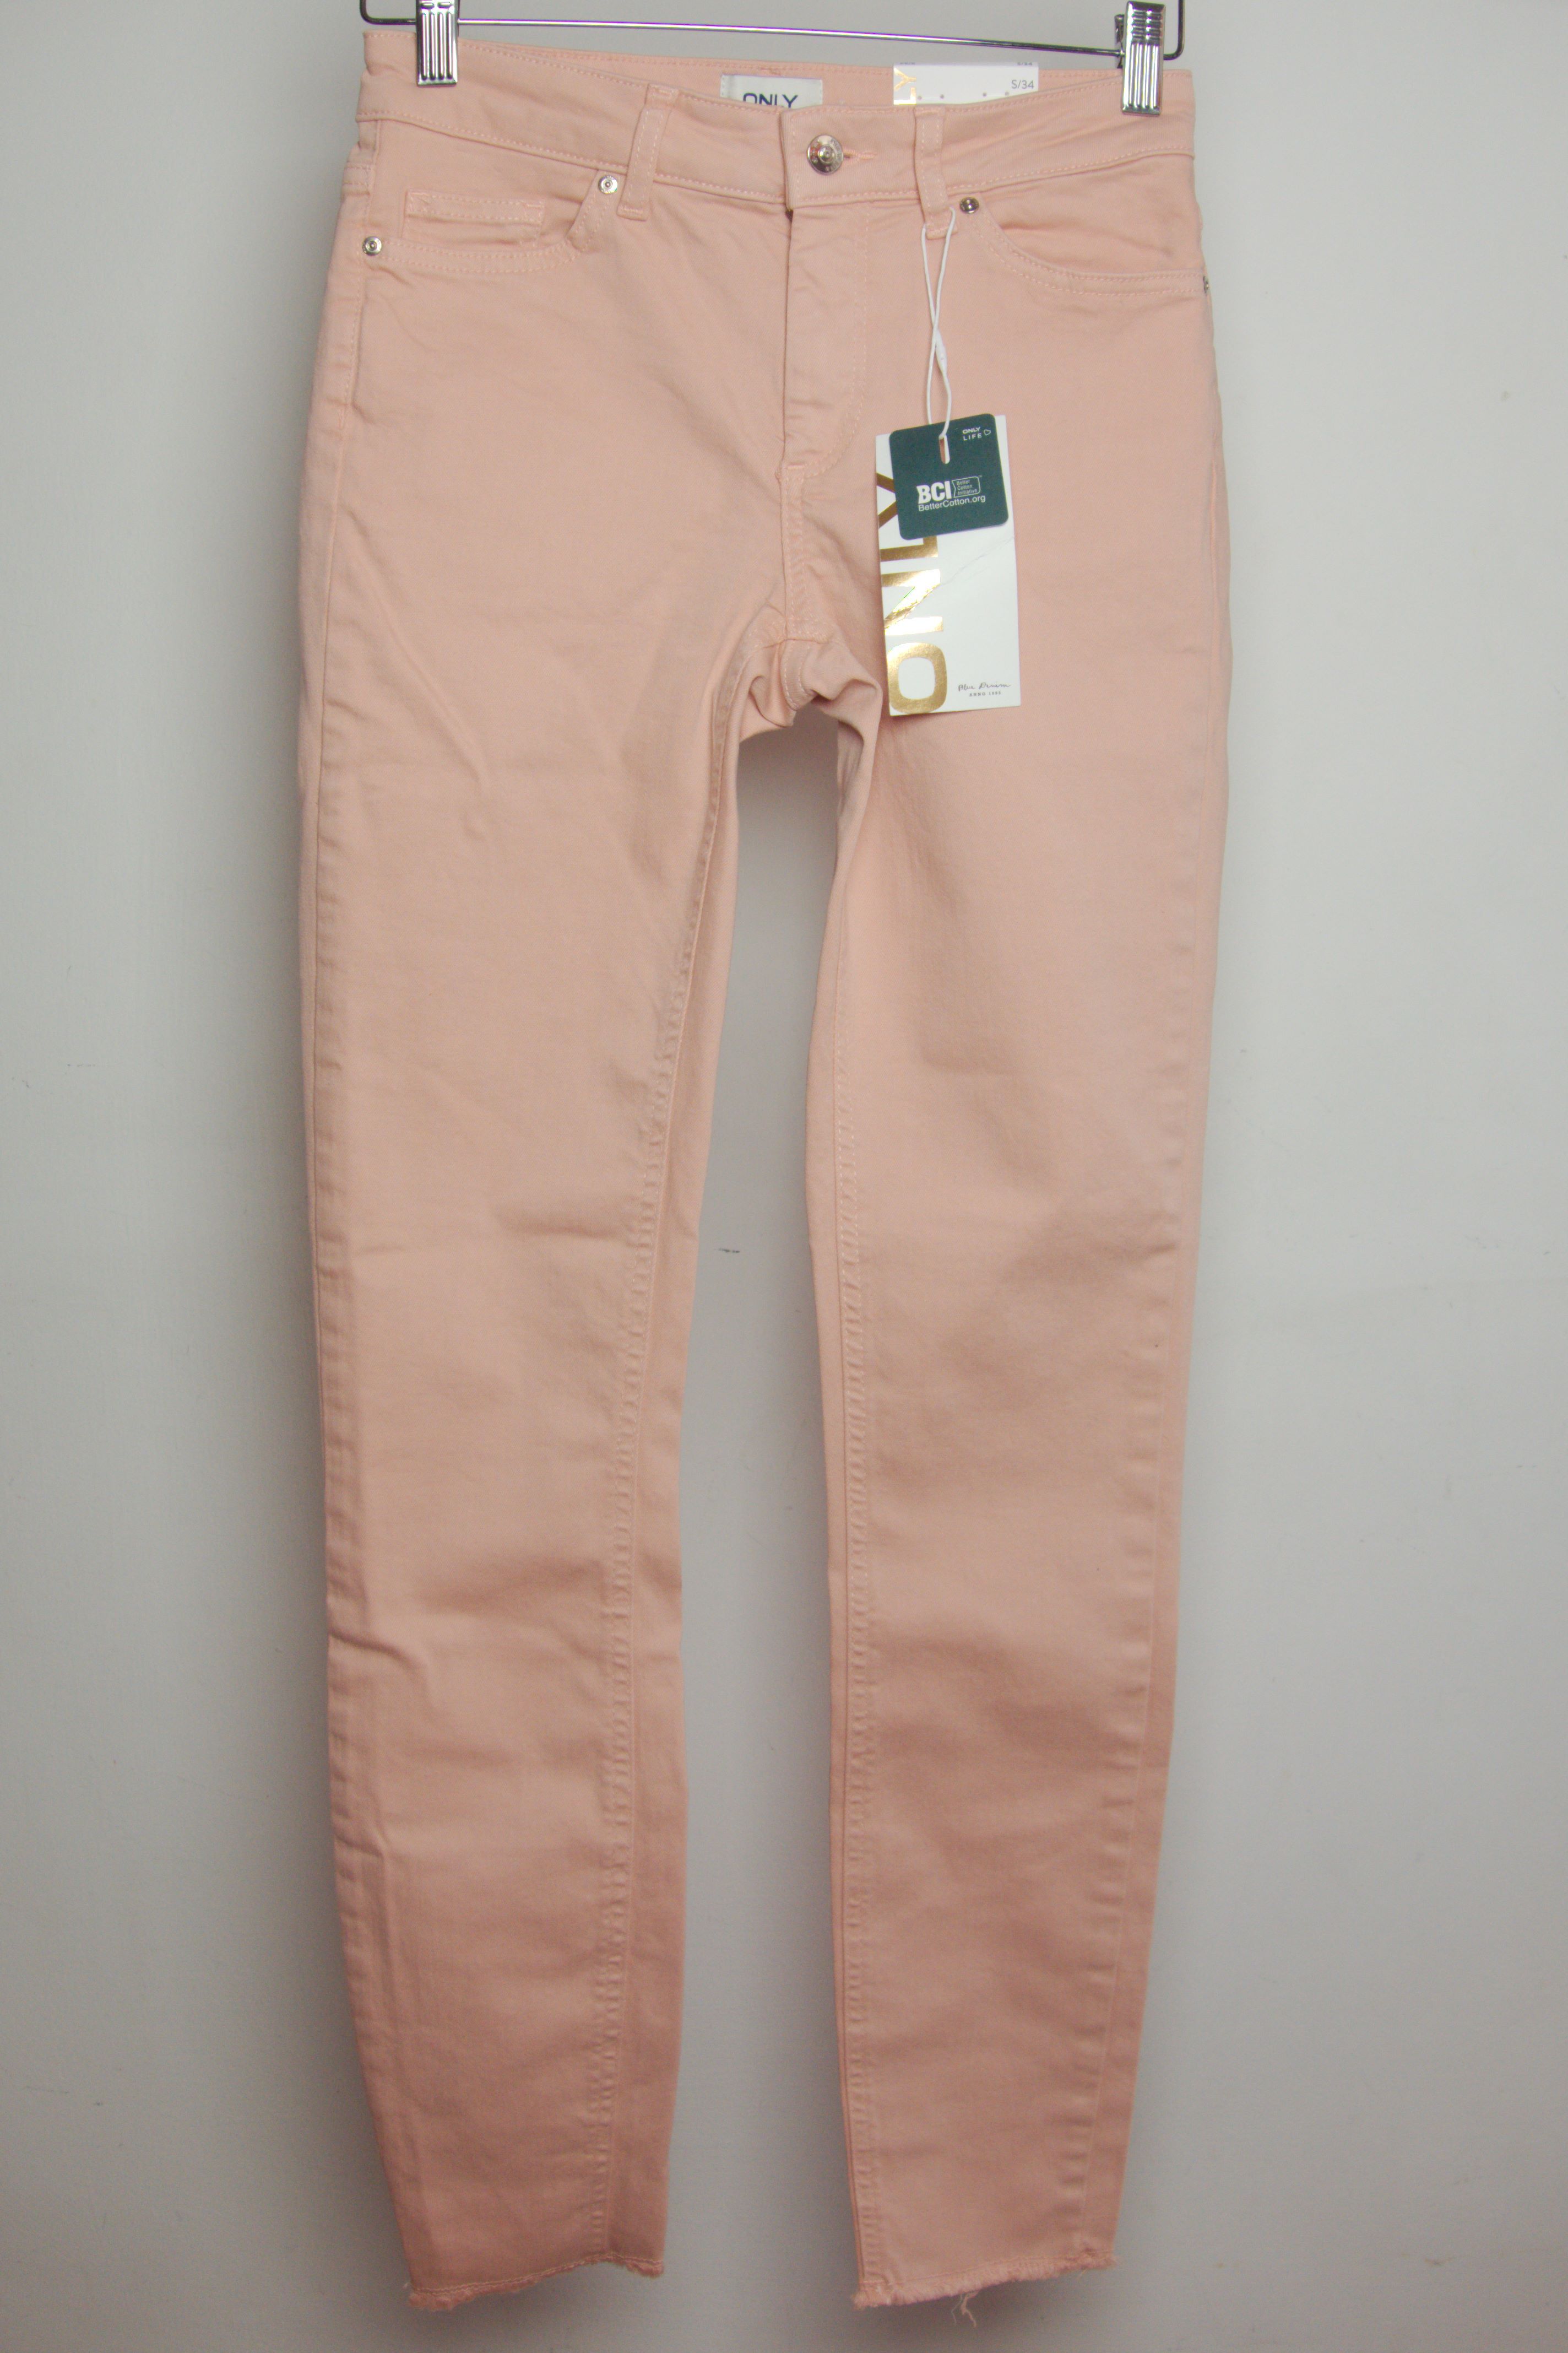 Only - Jeans Blush r. S/34